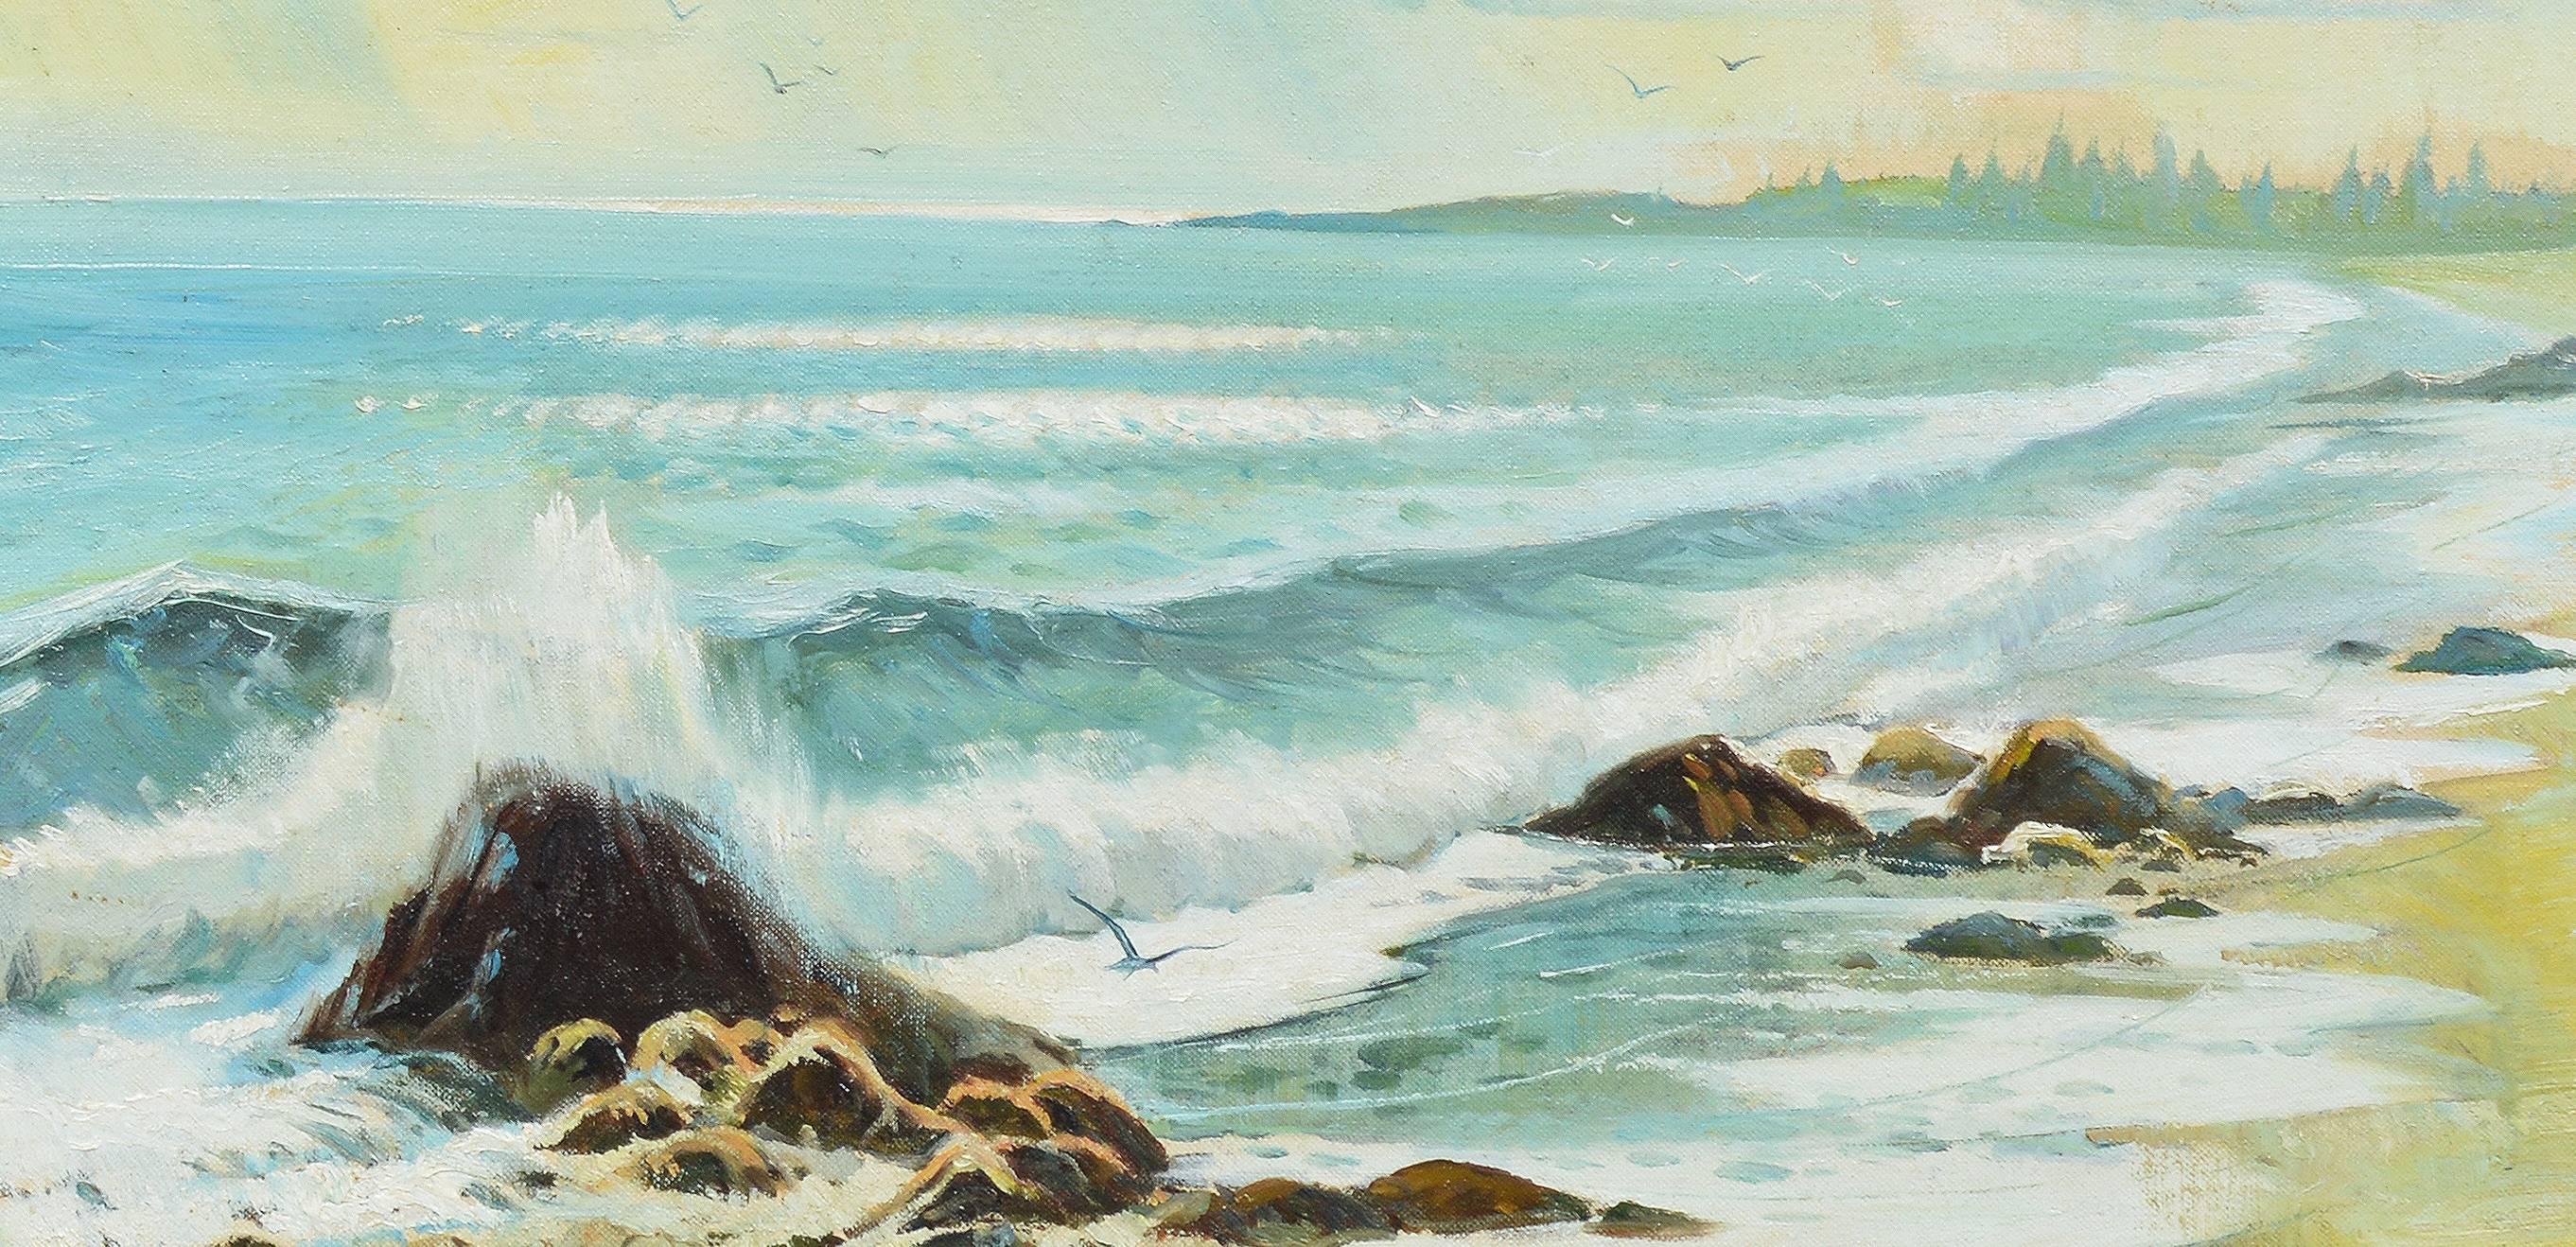 Waves Crashing at Nova Scotia - Gray Landscape Painting by Joseph Purcell